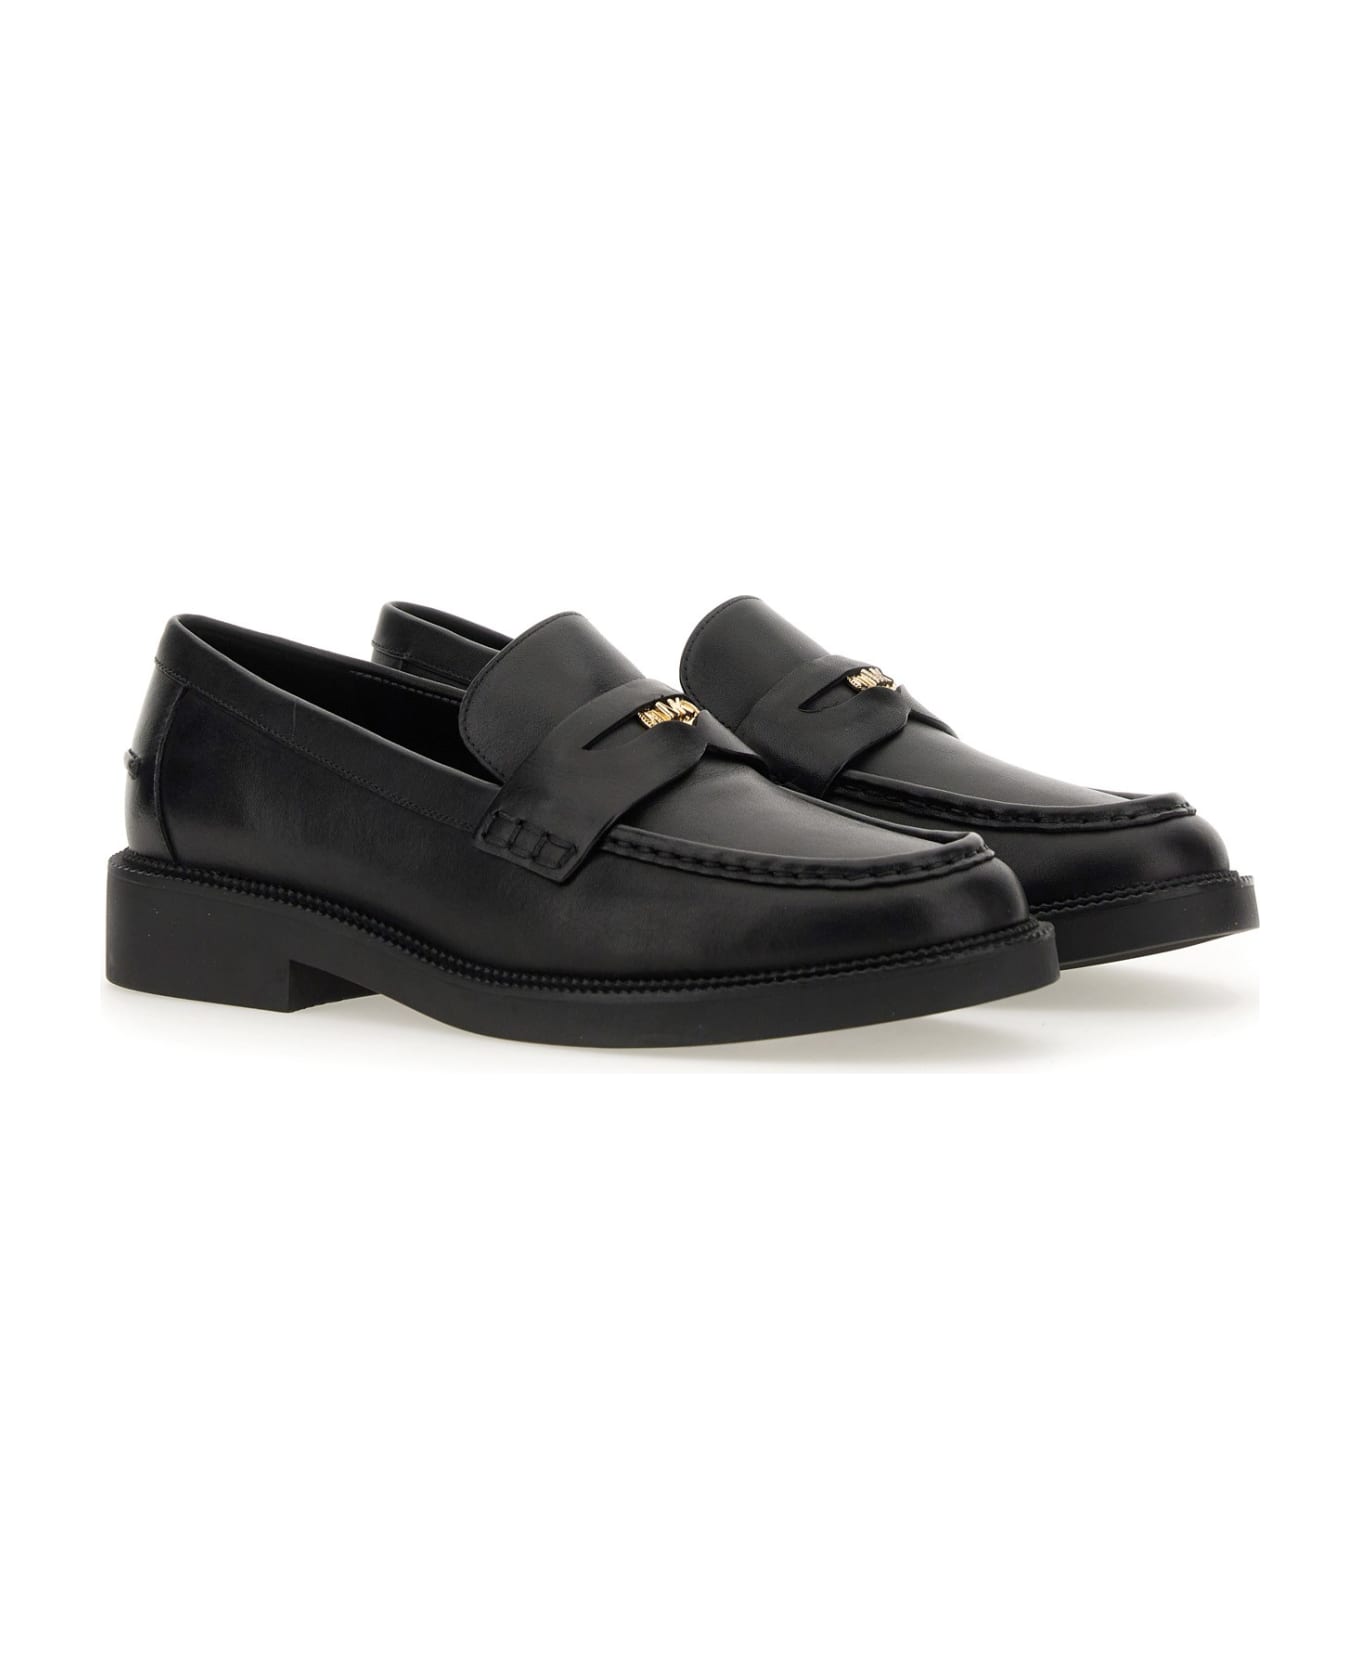 MICHAEL Michael Kors Loafer With Coin - NERO フラットシューズ